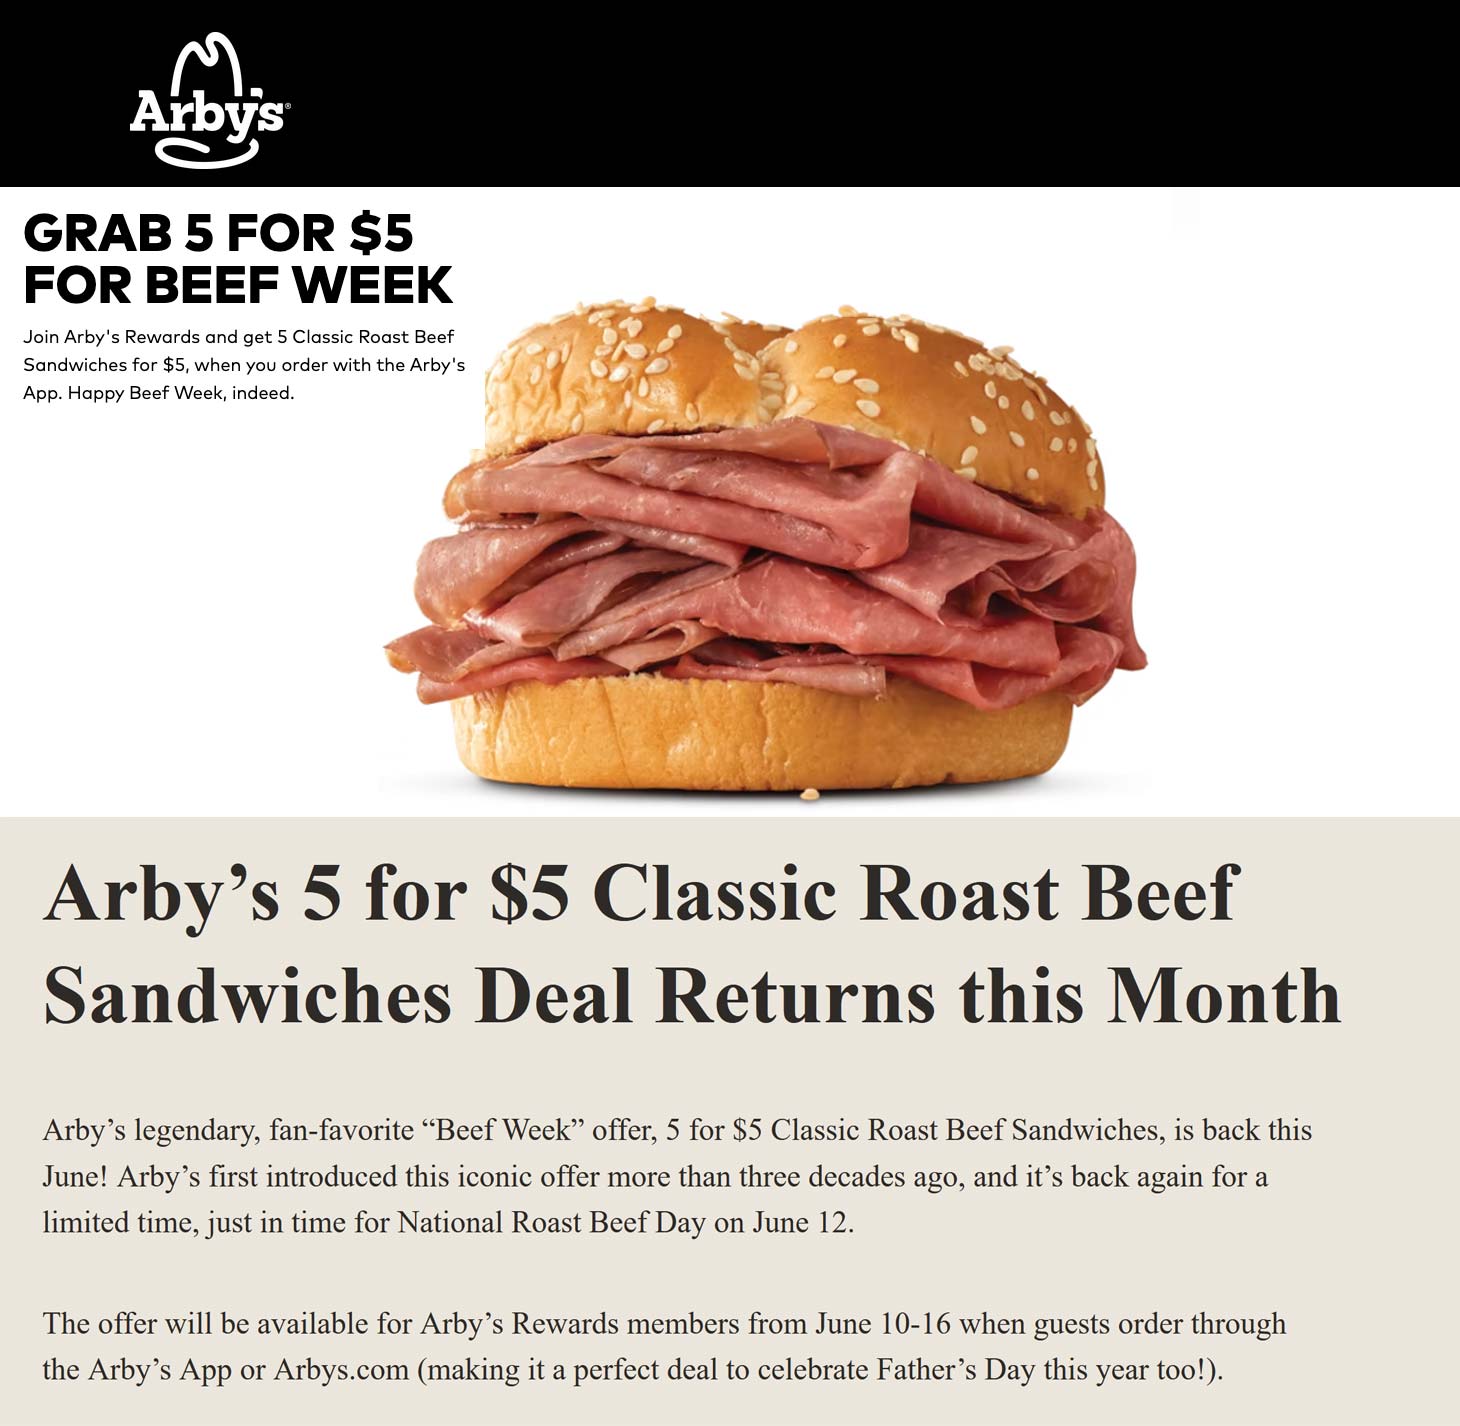 Arbys restaurants Coupon  5 roast beef sandwiches for $5 the 10-16th via mobile at Arbys restaurants #arbys 